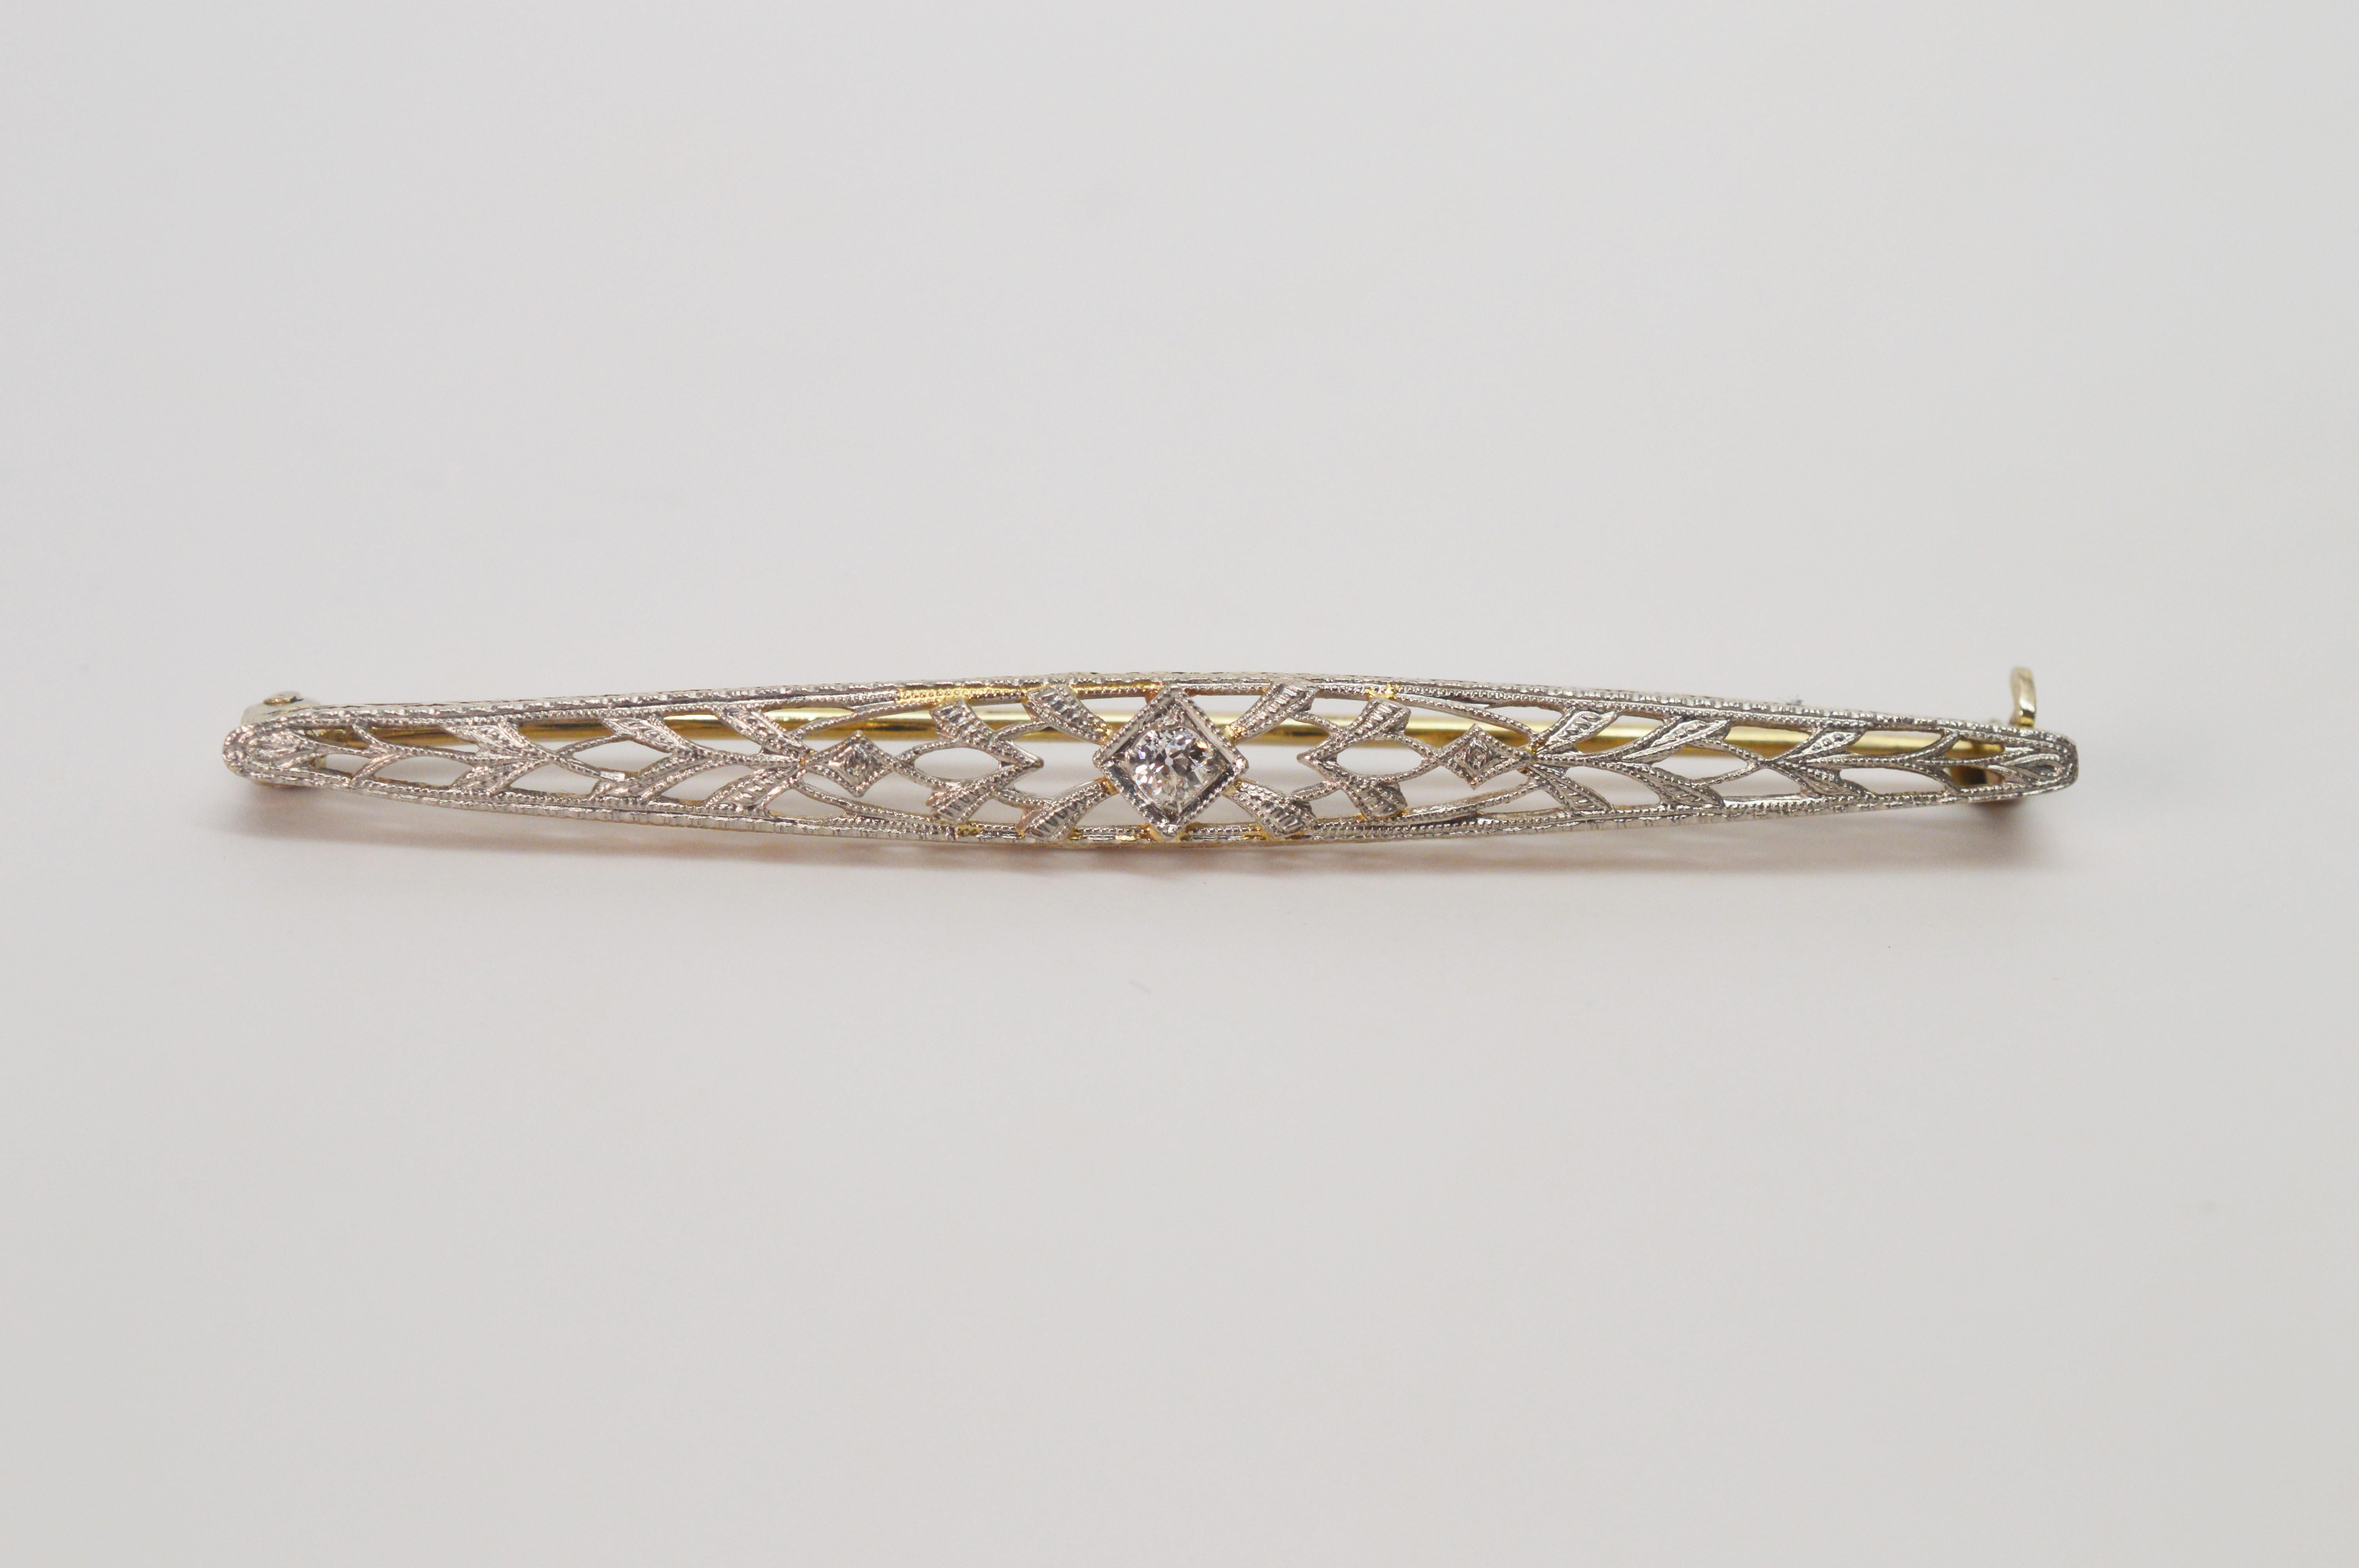 Antique diamond-cut ten carat white gold filigree bar pin with .05 carat diamond accent. Oblong, measures 2-1/4 inches long and approximately 1/4 inch wide at center. 